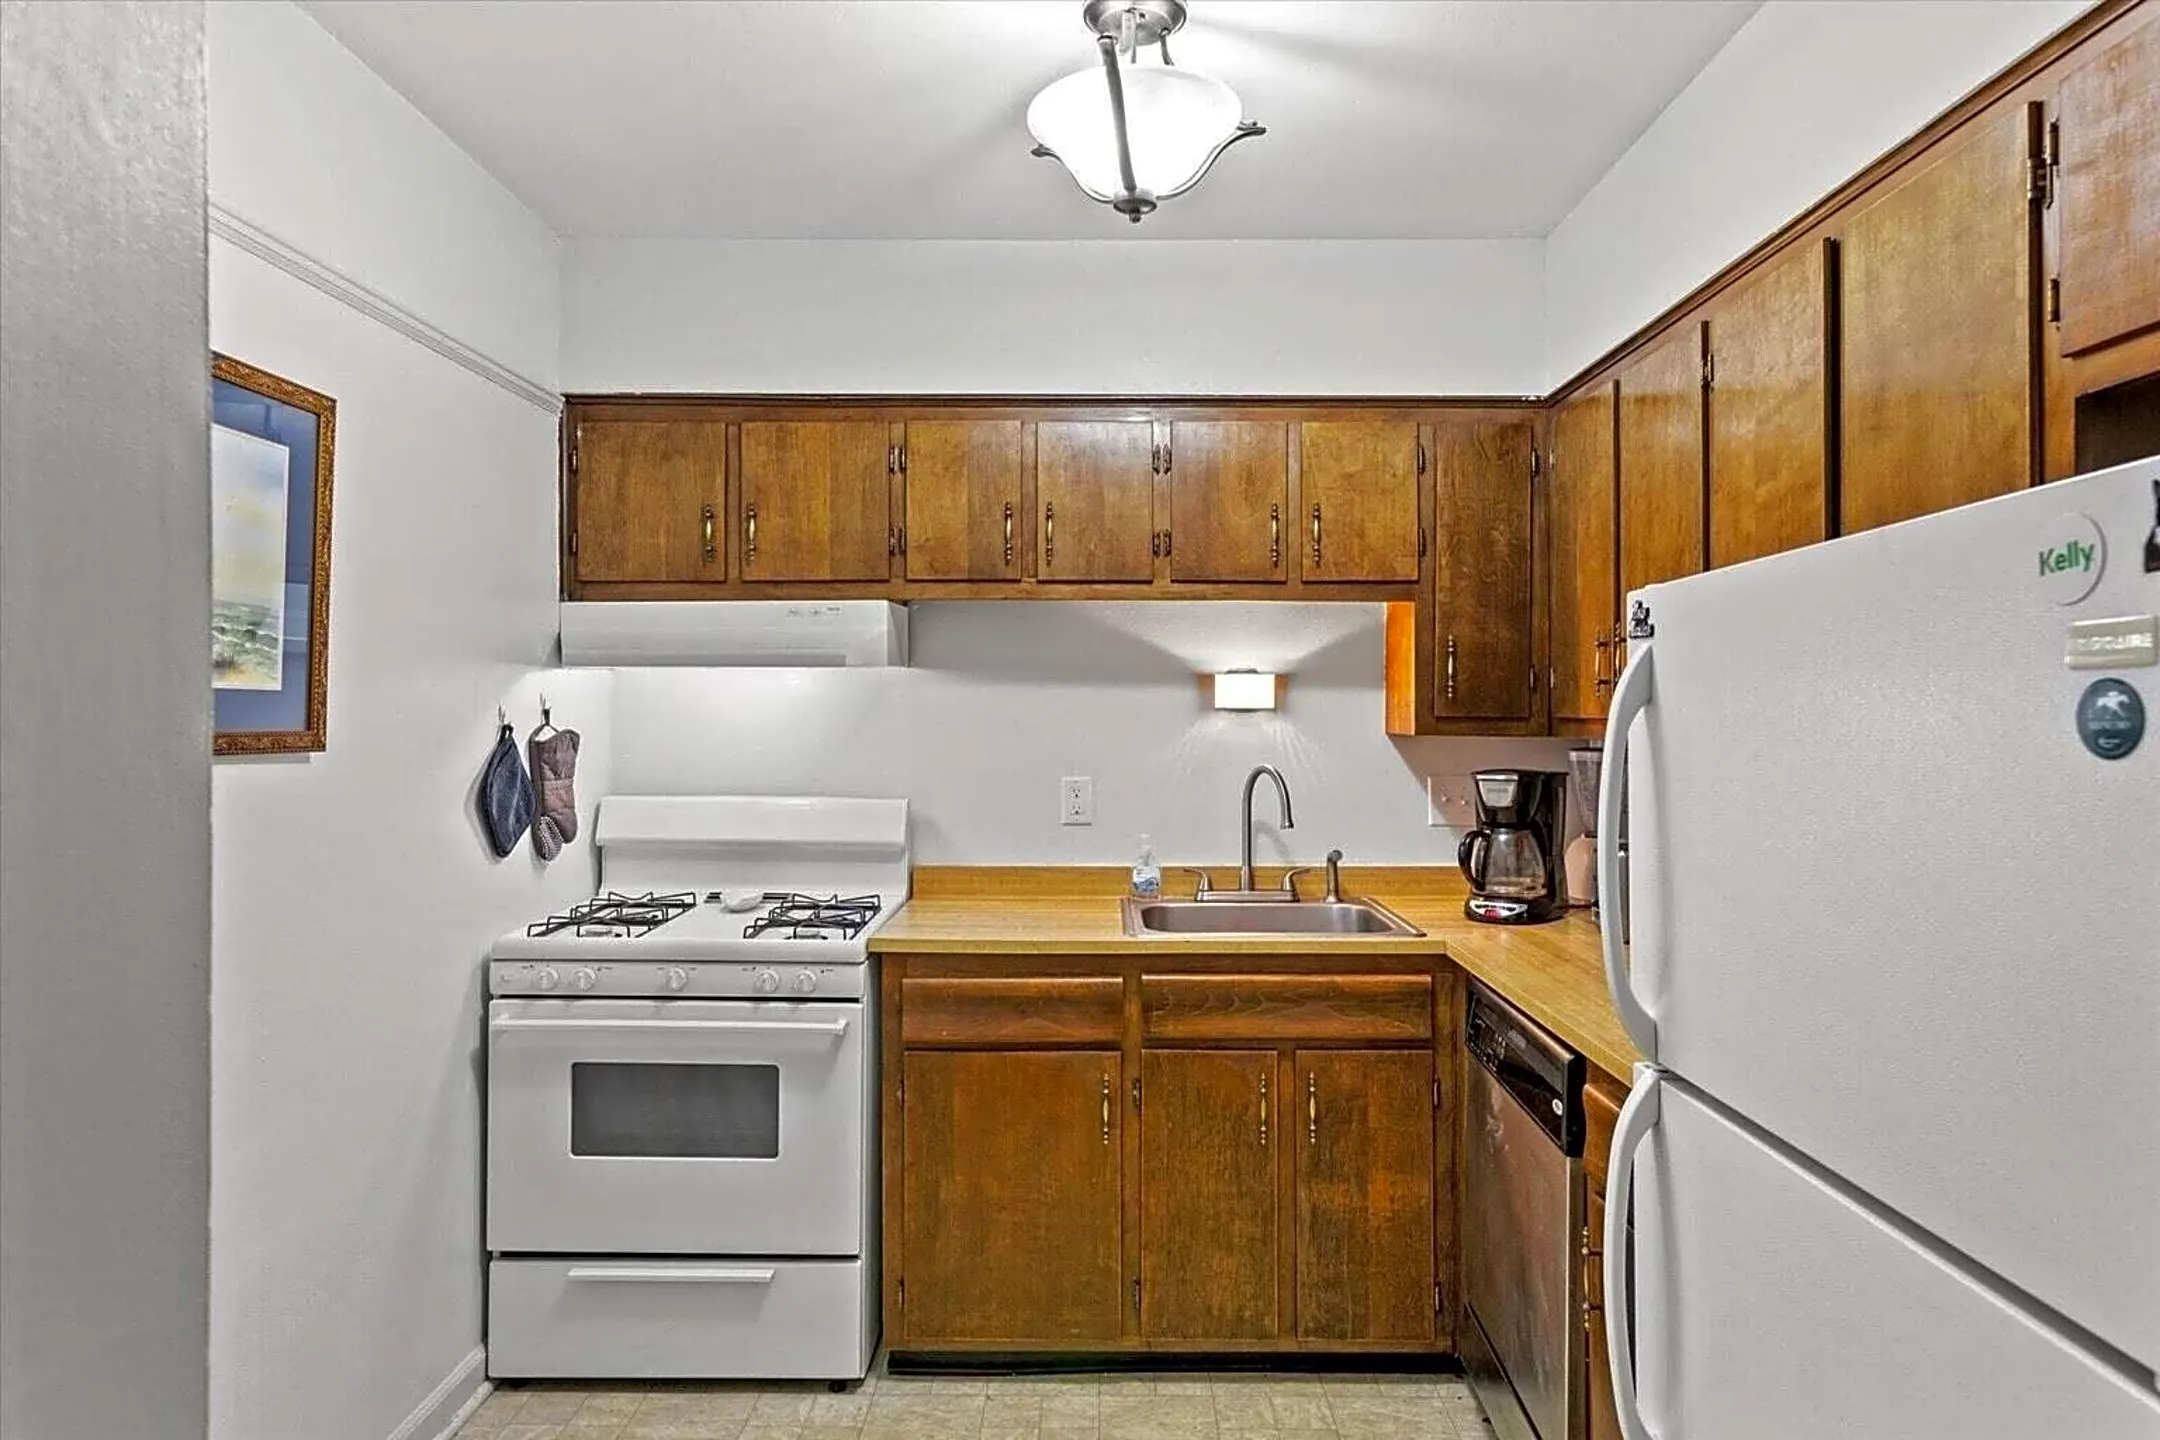 Kitchen - 1048 Armstrong Mill Rd #C - Lexington, KY